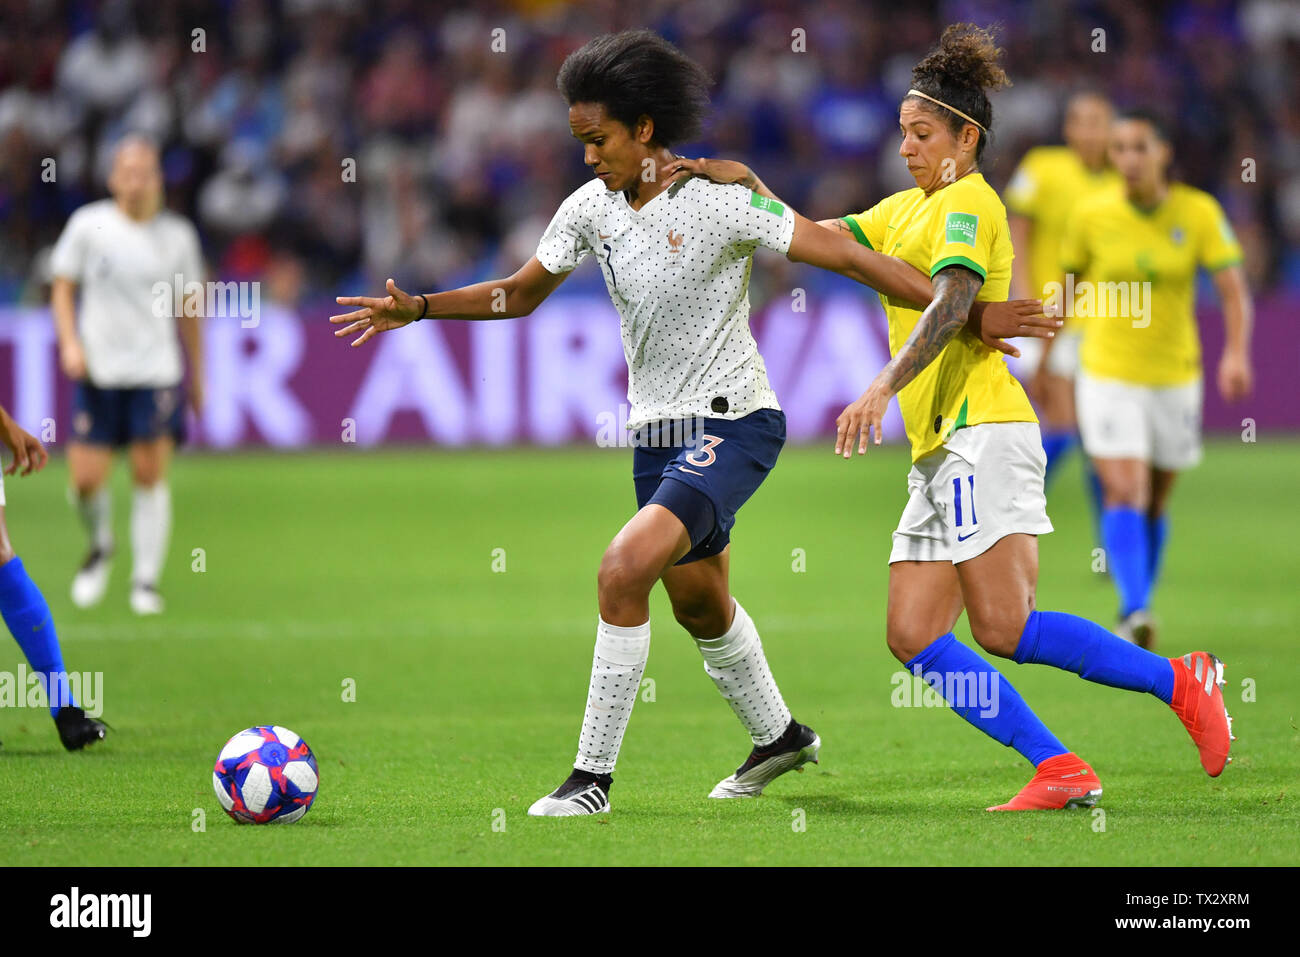 Le Havre, Frankreich. 23rd June, 2019. duels, match scene, duel, duel, tackle, tackling, dynamics, action, Wendie Renard (France) (3) Cristiane (Brazil) (11), 23.06.2019, Le Havre (France), football, FIFA Women's World Cup 2019, Eighth finals France - Brazil, FIFA REGULATIONS PROHIBIT ANY USE OF PHOTOGRAPHS AS IMAGE SEQUENCES AND/OR QUASI VIDEO. | usage worldwide Credit: dpa/Alamy Live News Stock Photo